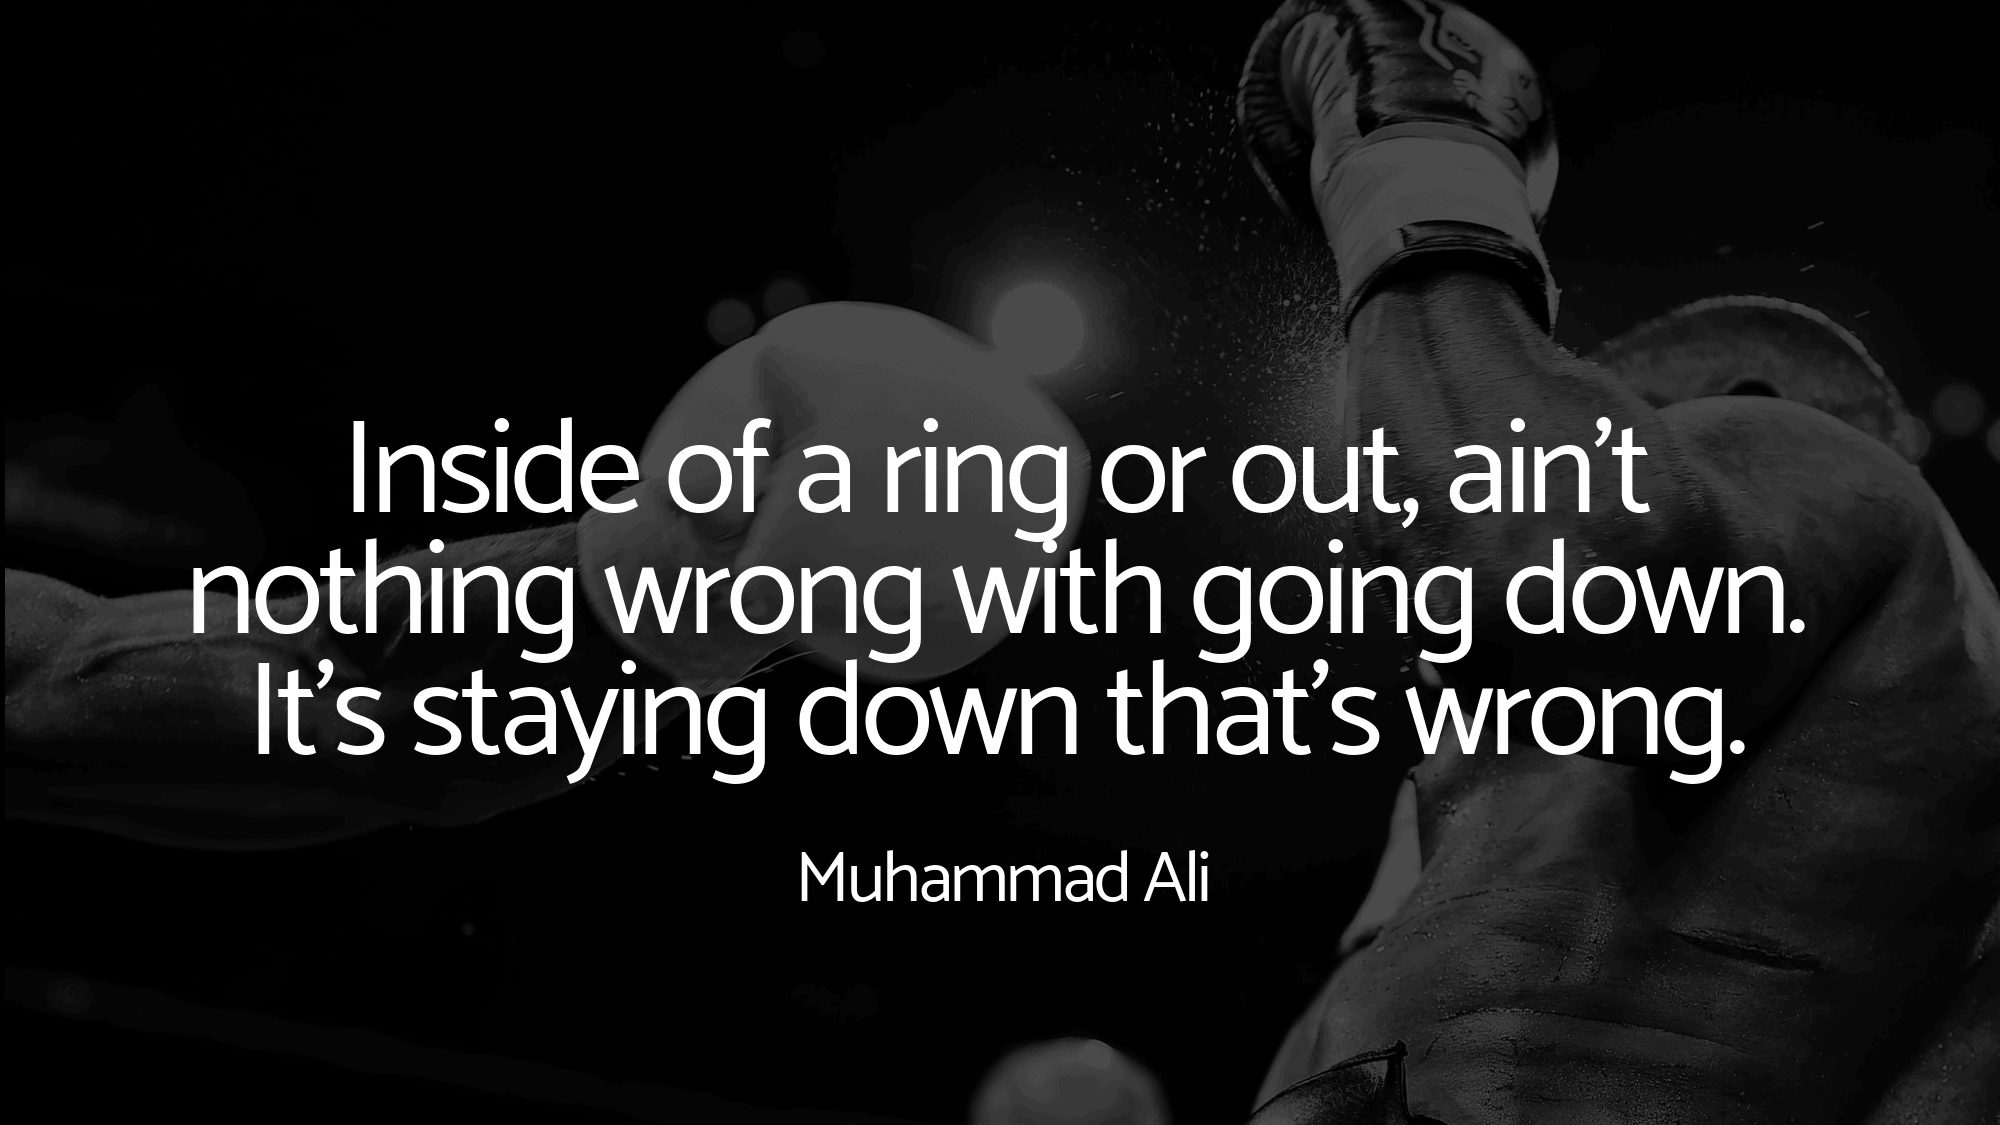 15 Life Lessons Learned from Muhammad Ali